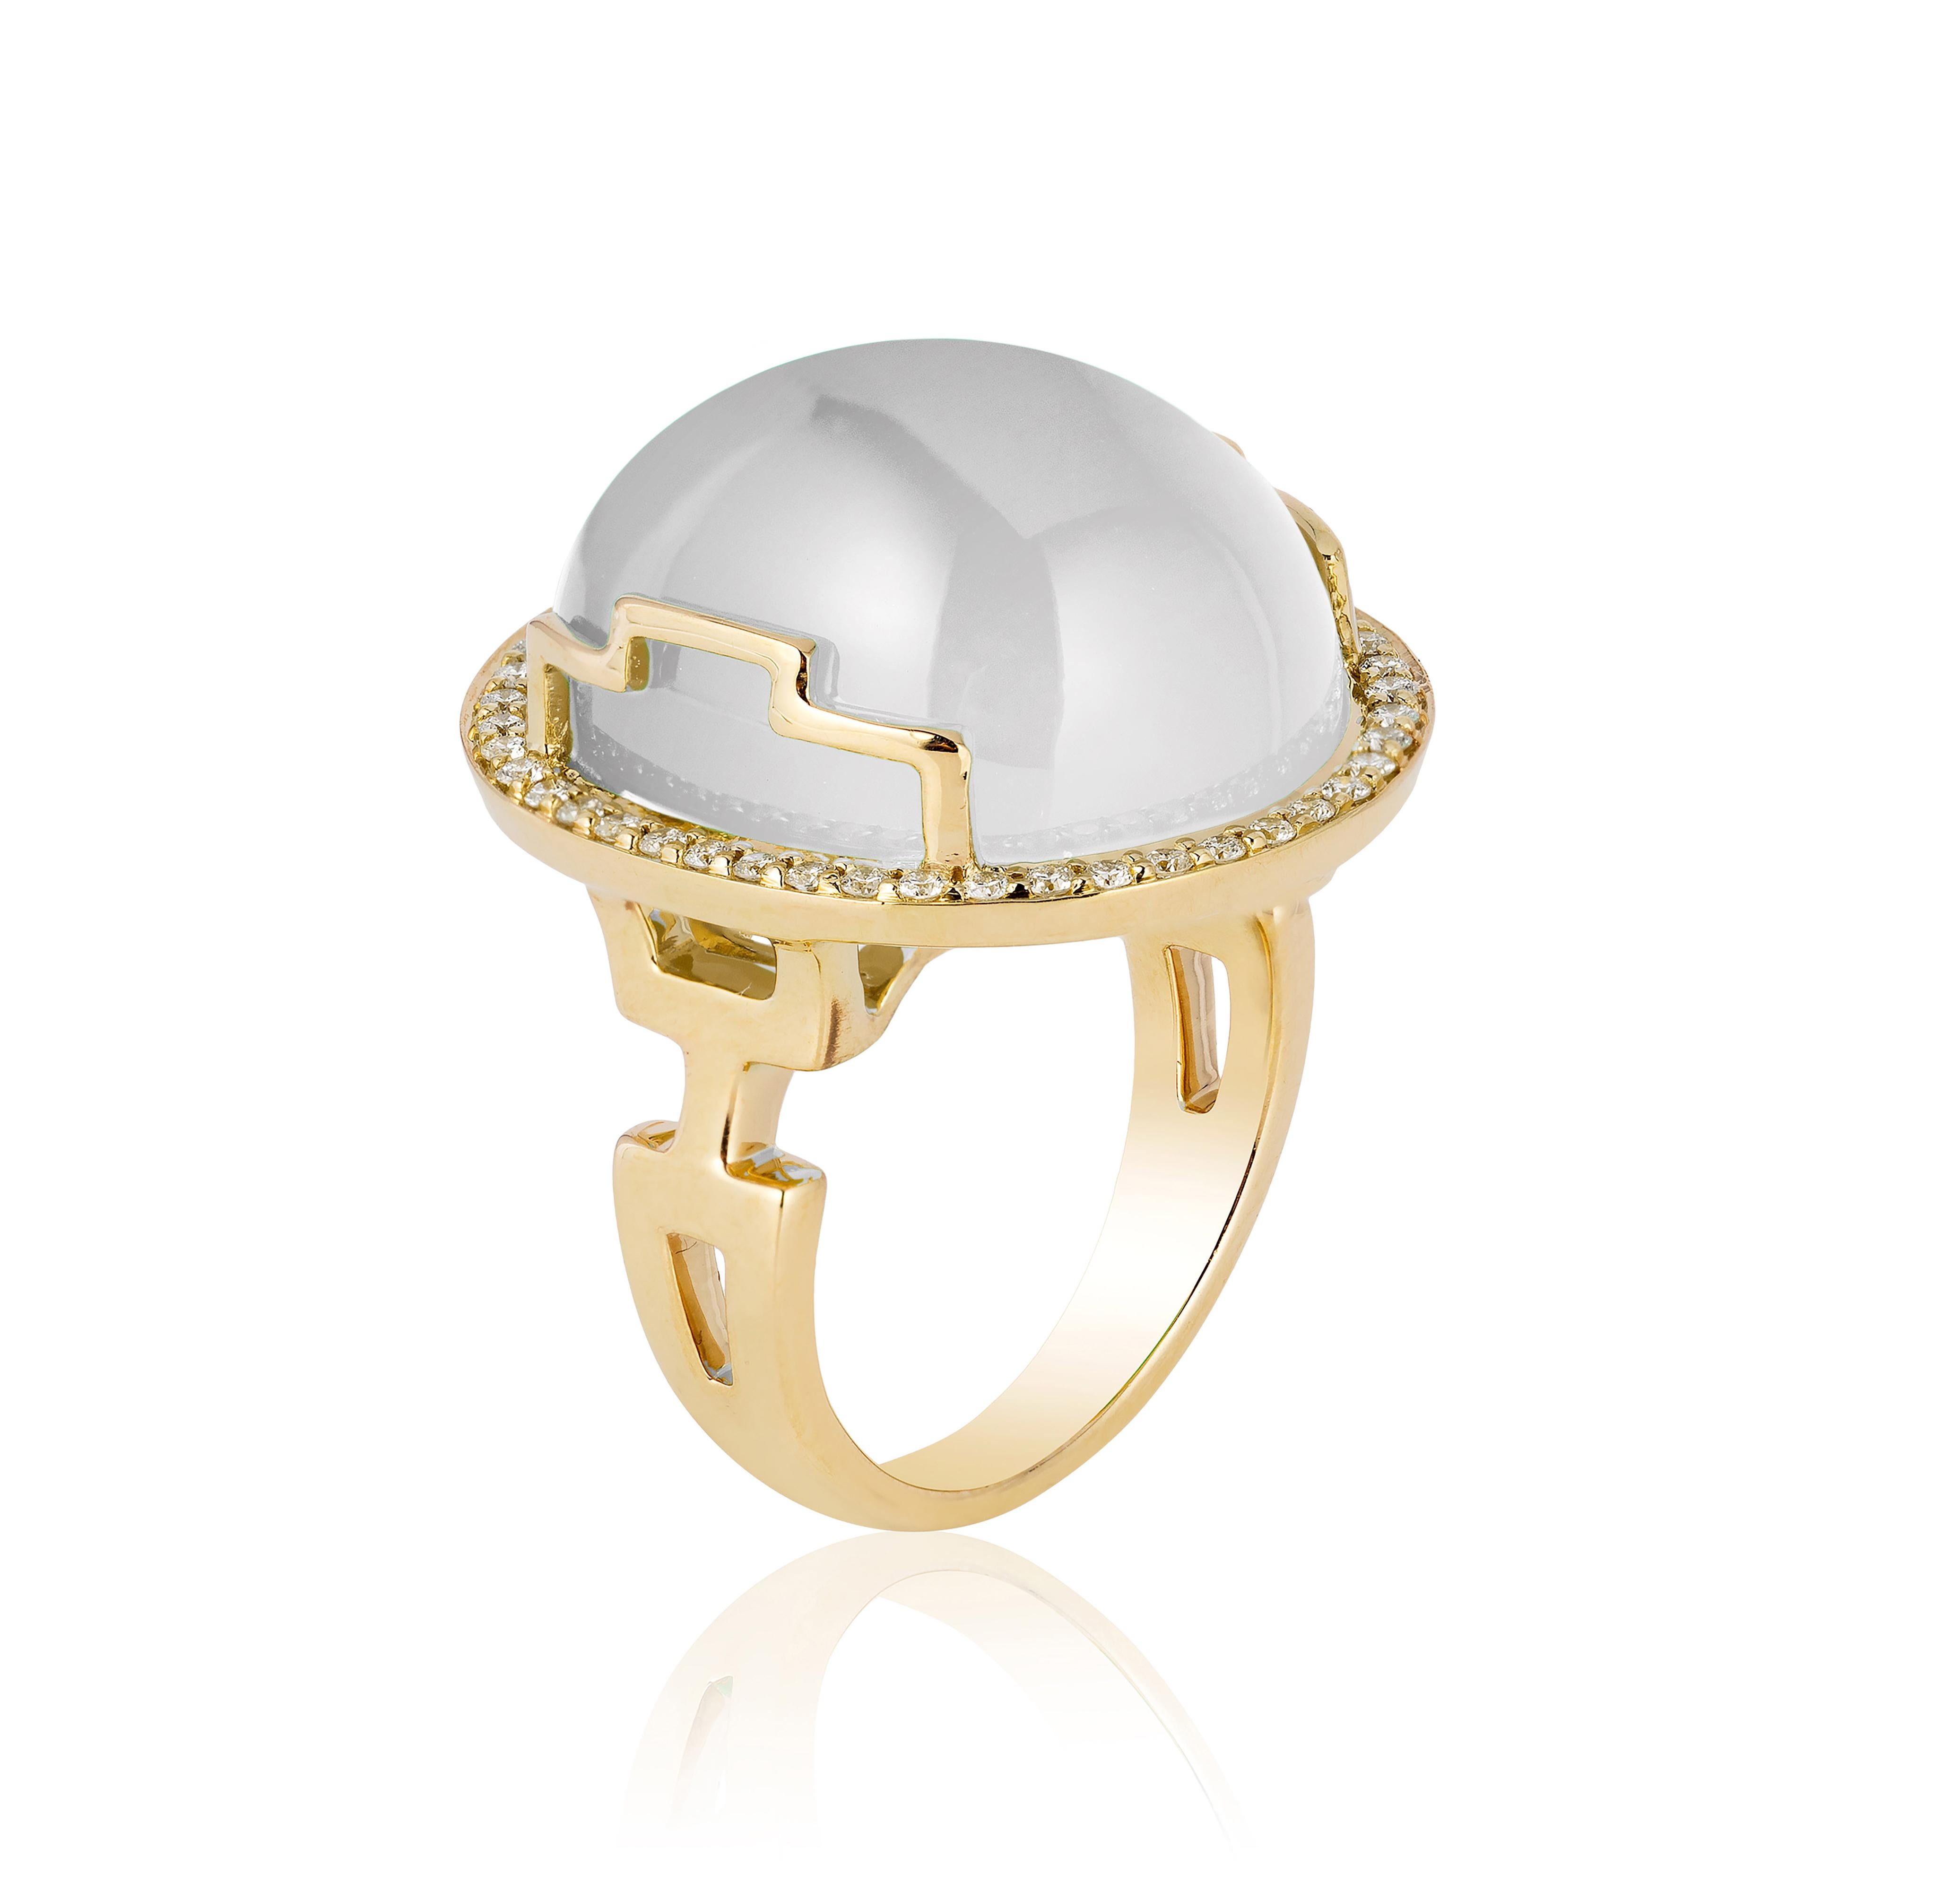 Moon Quartz Oval Cabochon Ring in 18K Yellow Gold, from 'Rock N Roll' Collection. Please allow 2-4 weeks for this item to be delivered.

Stone Size: 20 x 17 mm

Diamonds: G-H / VS, Approx Wt: 0.31 Cts